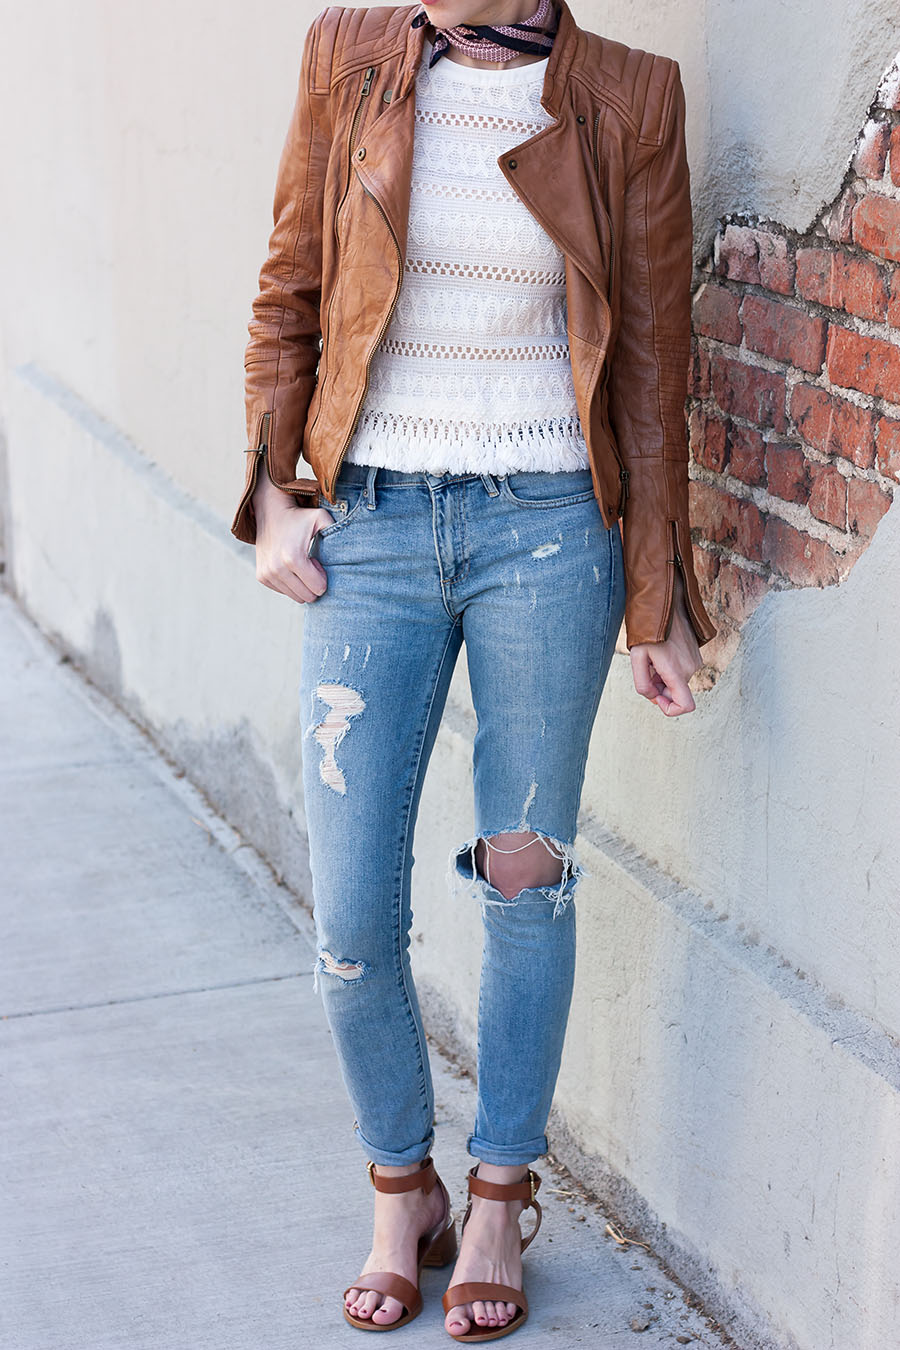 How to Style a Leather Jacket, Fringe Crochet Top, Gap Jeans, ShoeMint Sandals